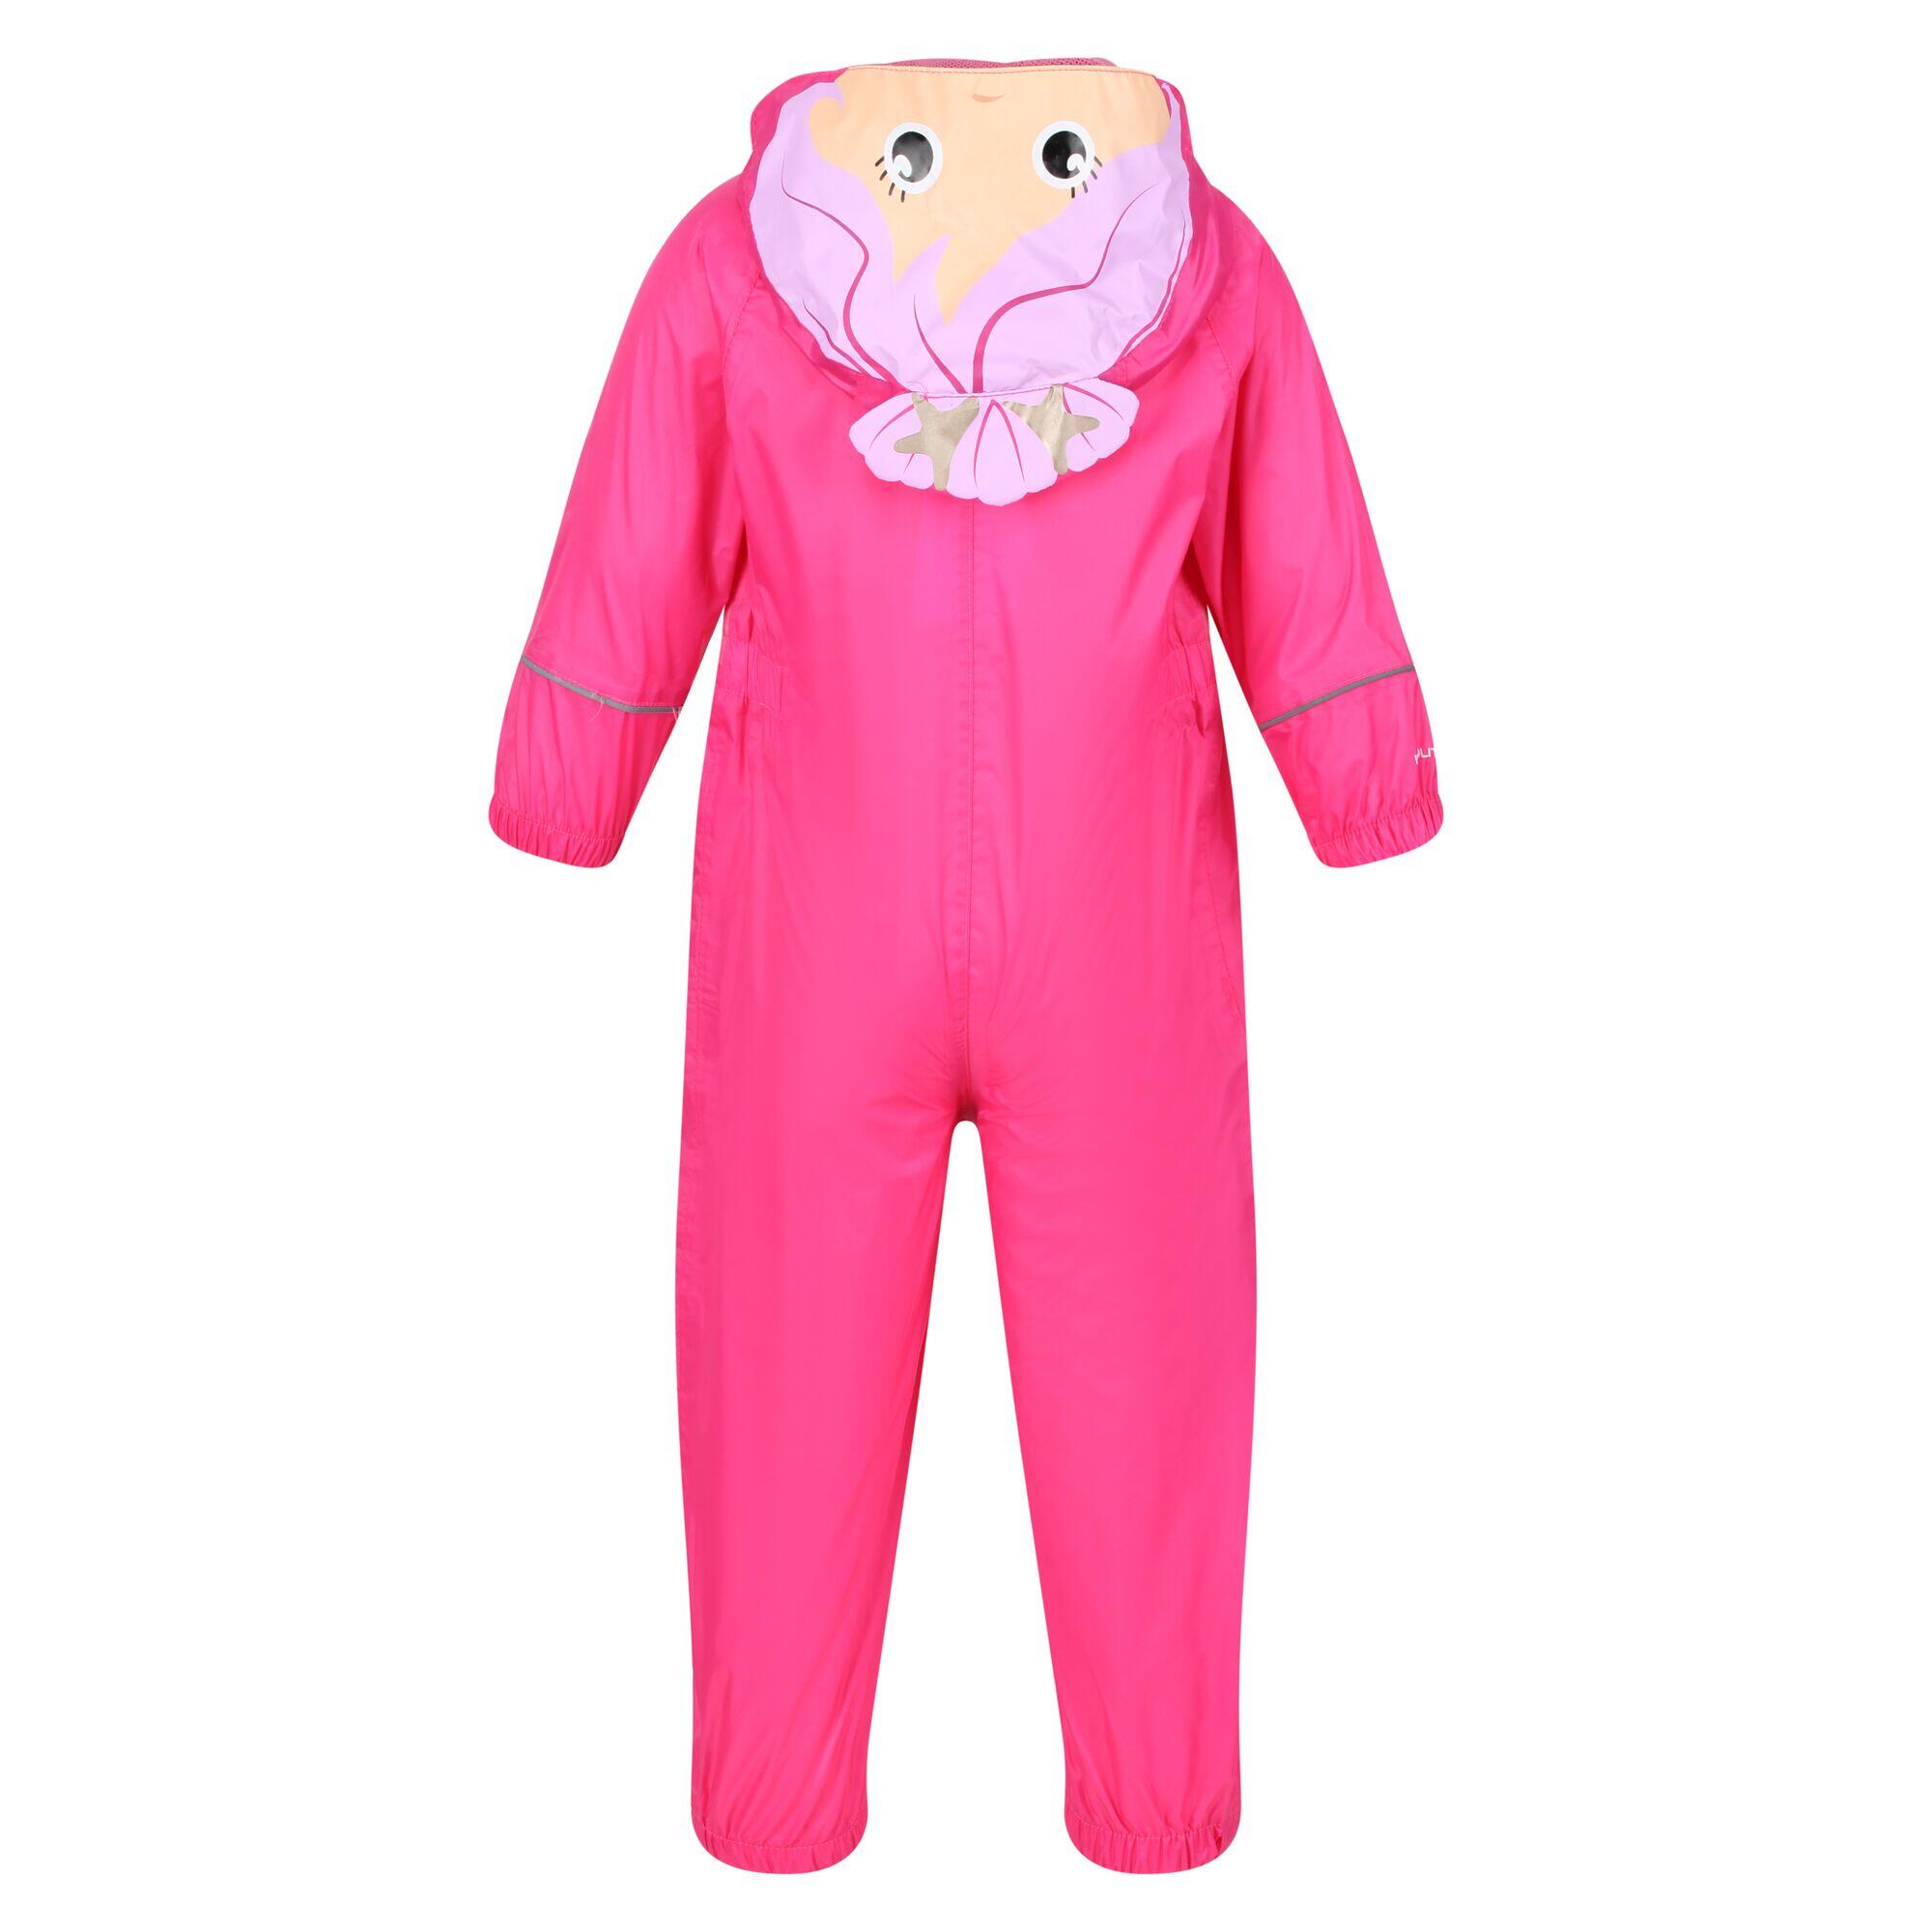 Charco Kids Hiking Hooded Puddle Suit - Pink Mermaid 4/4